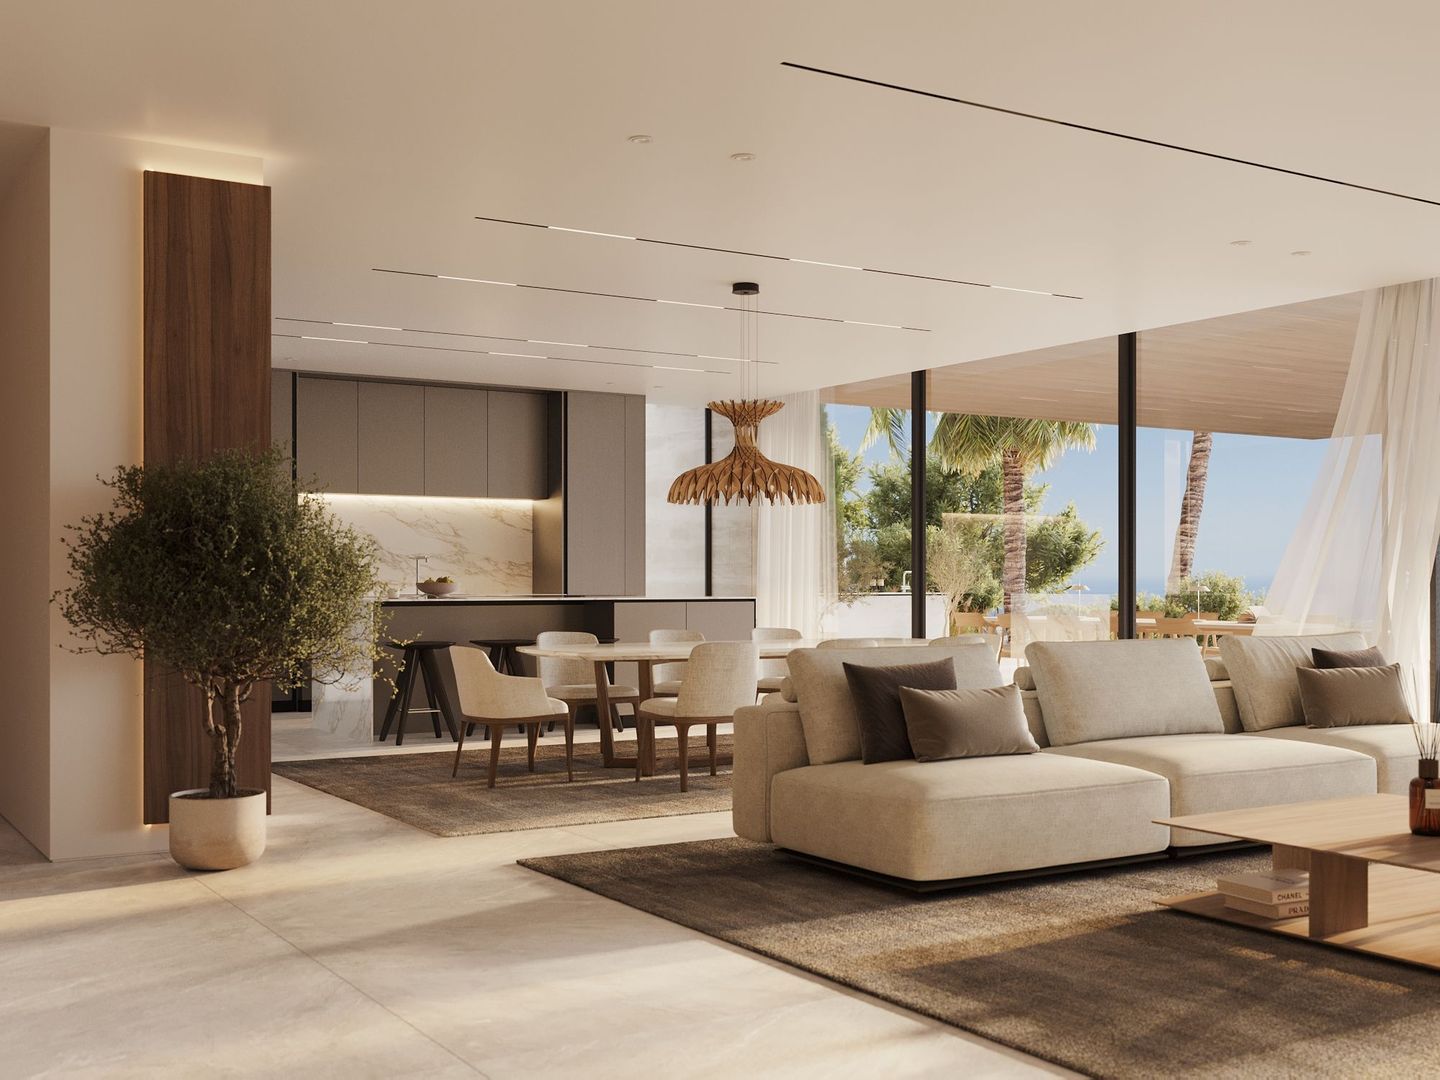 One of the most exciting property launches in Marbella, Benahavis foto-4